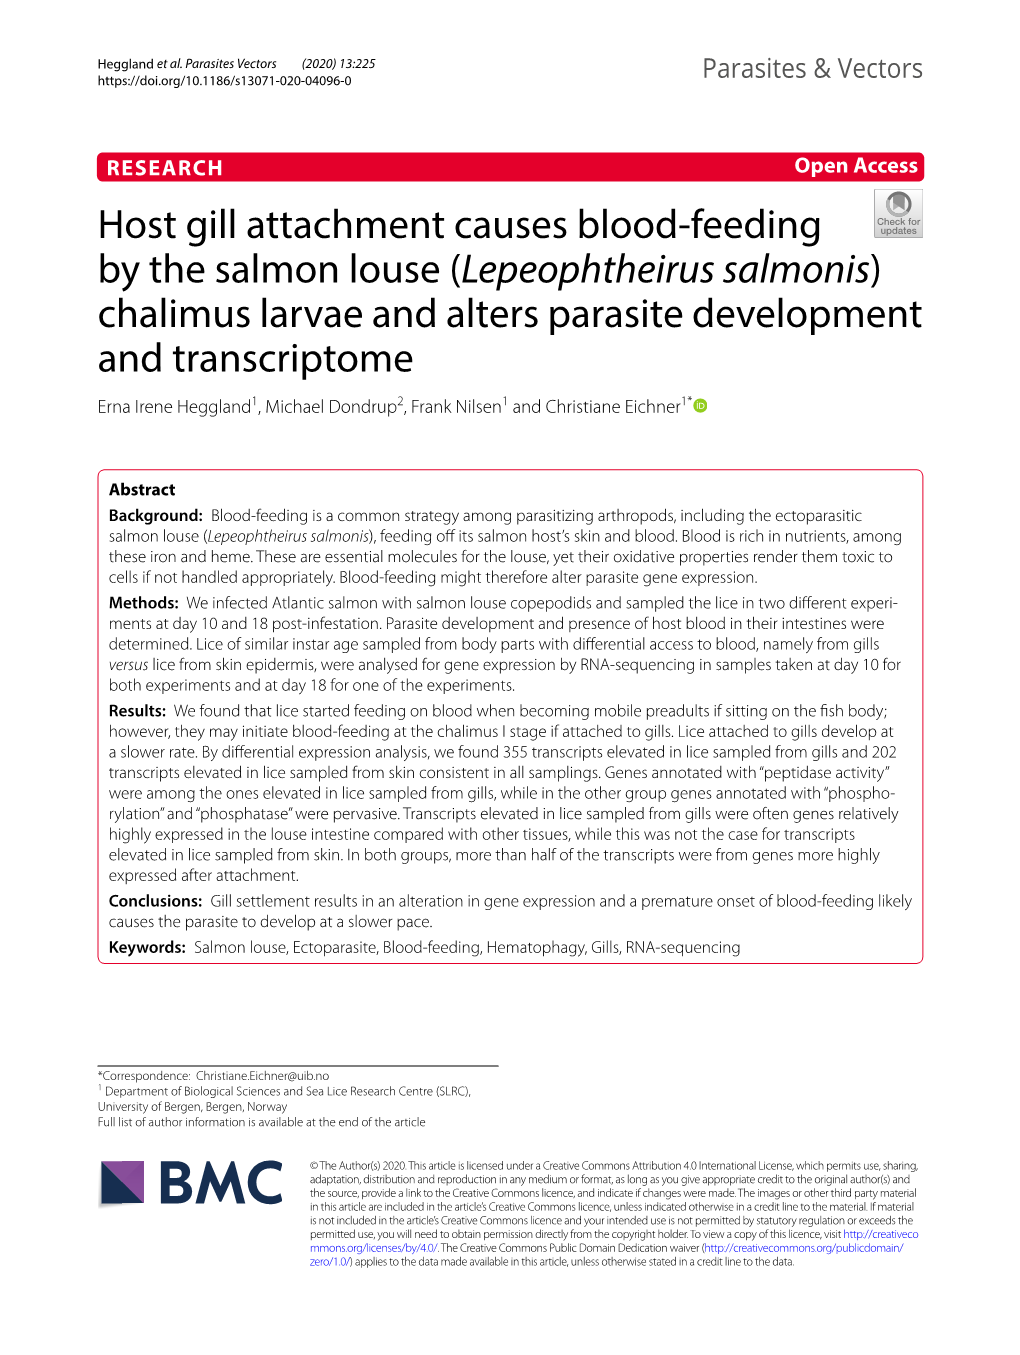 Host Gill Attachment Causes Blood-Feeding by the Salmon Louse